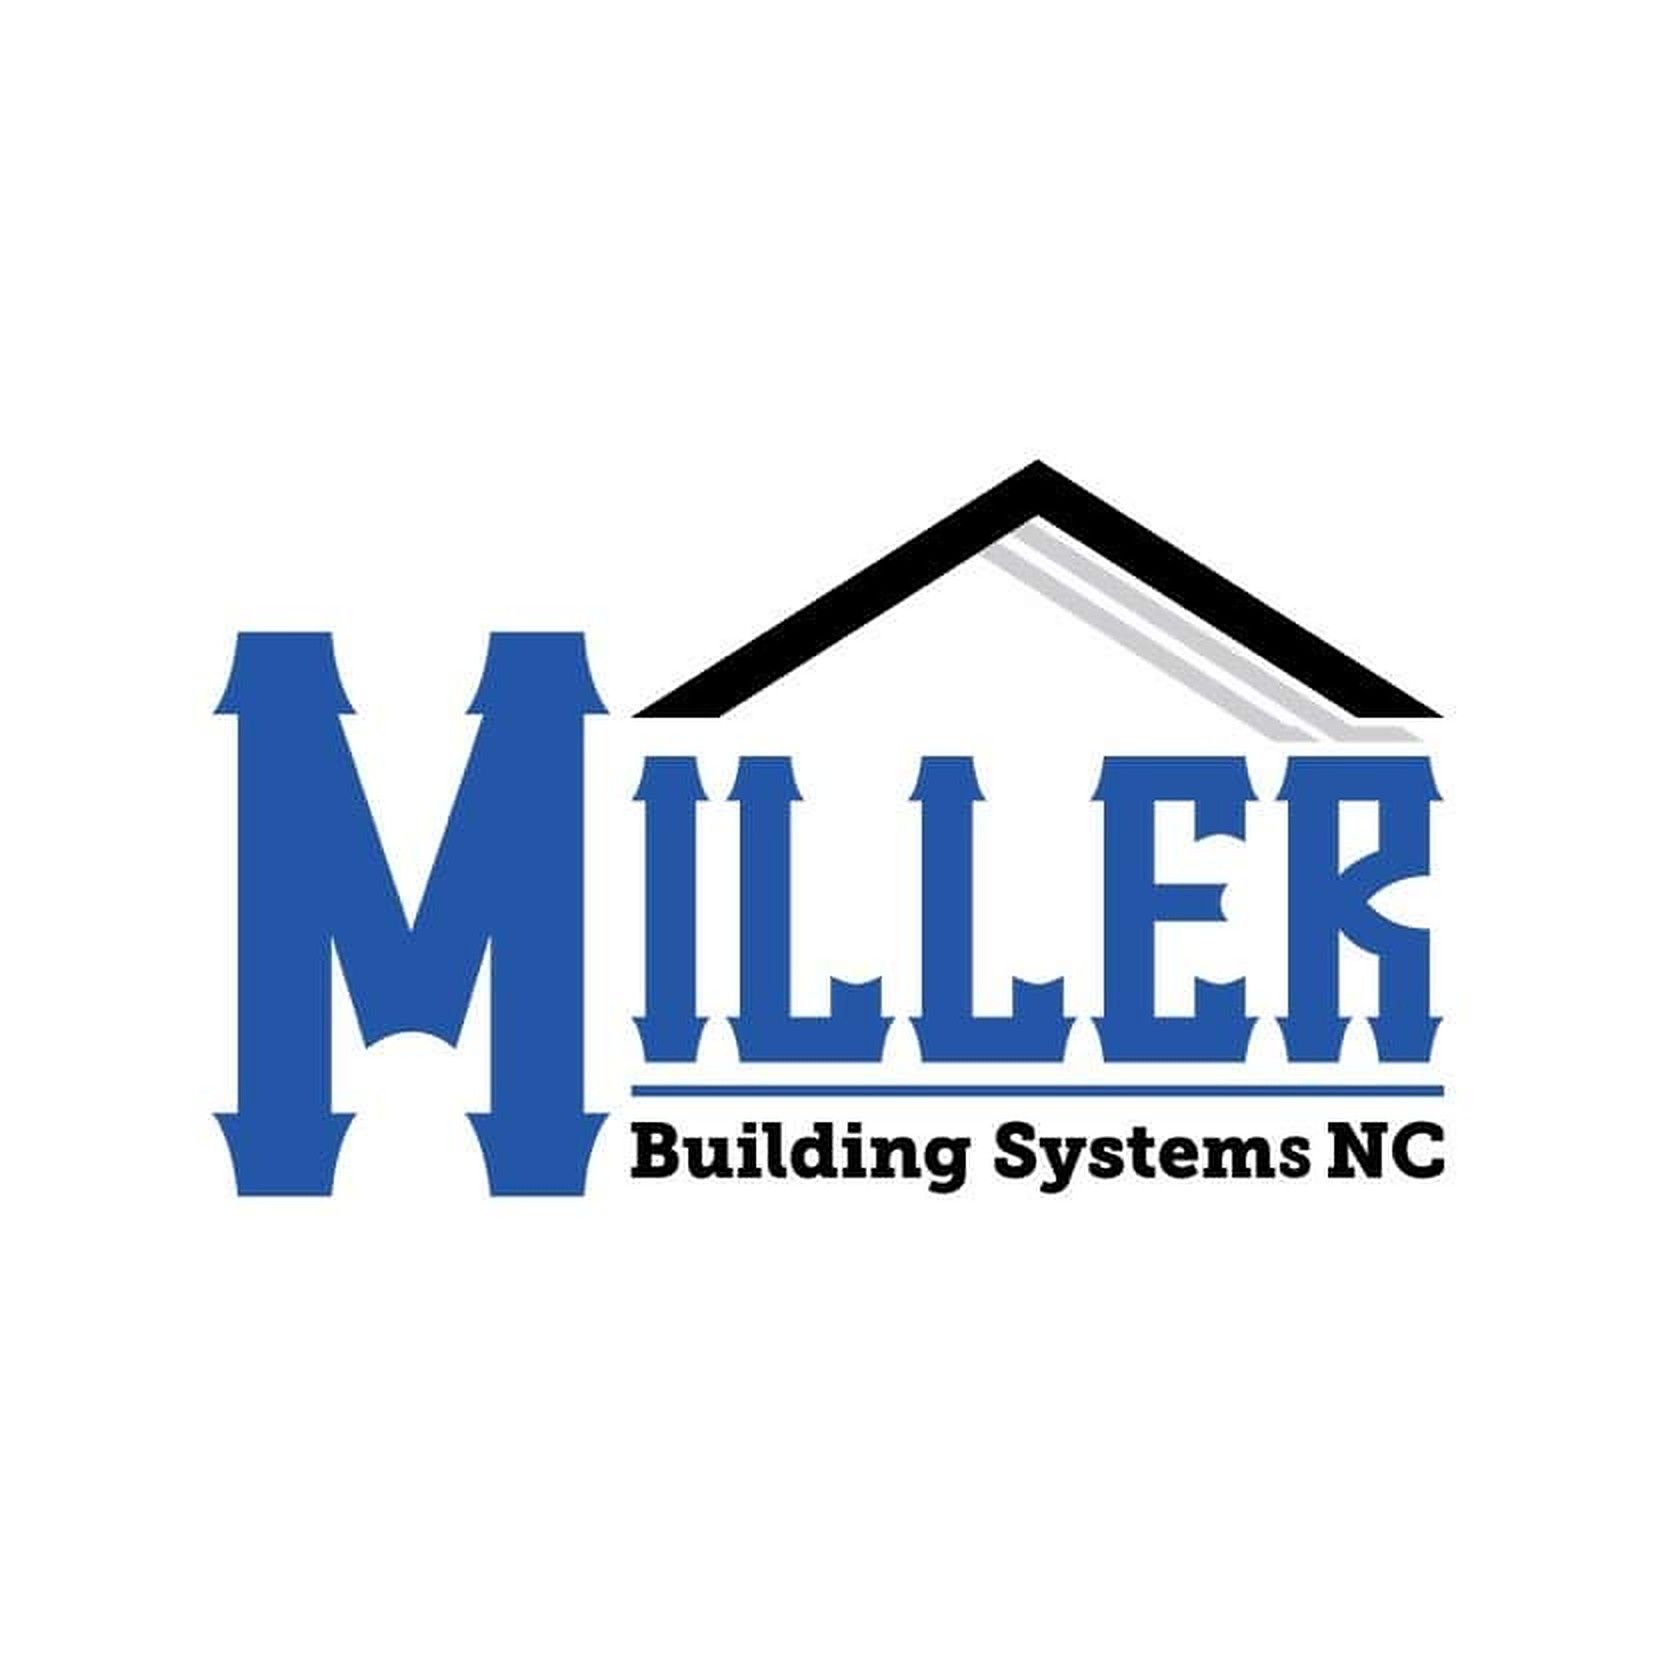 Miller Building Systems NC Logo